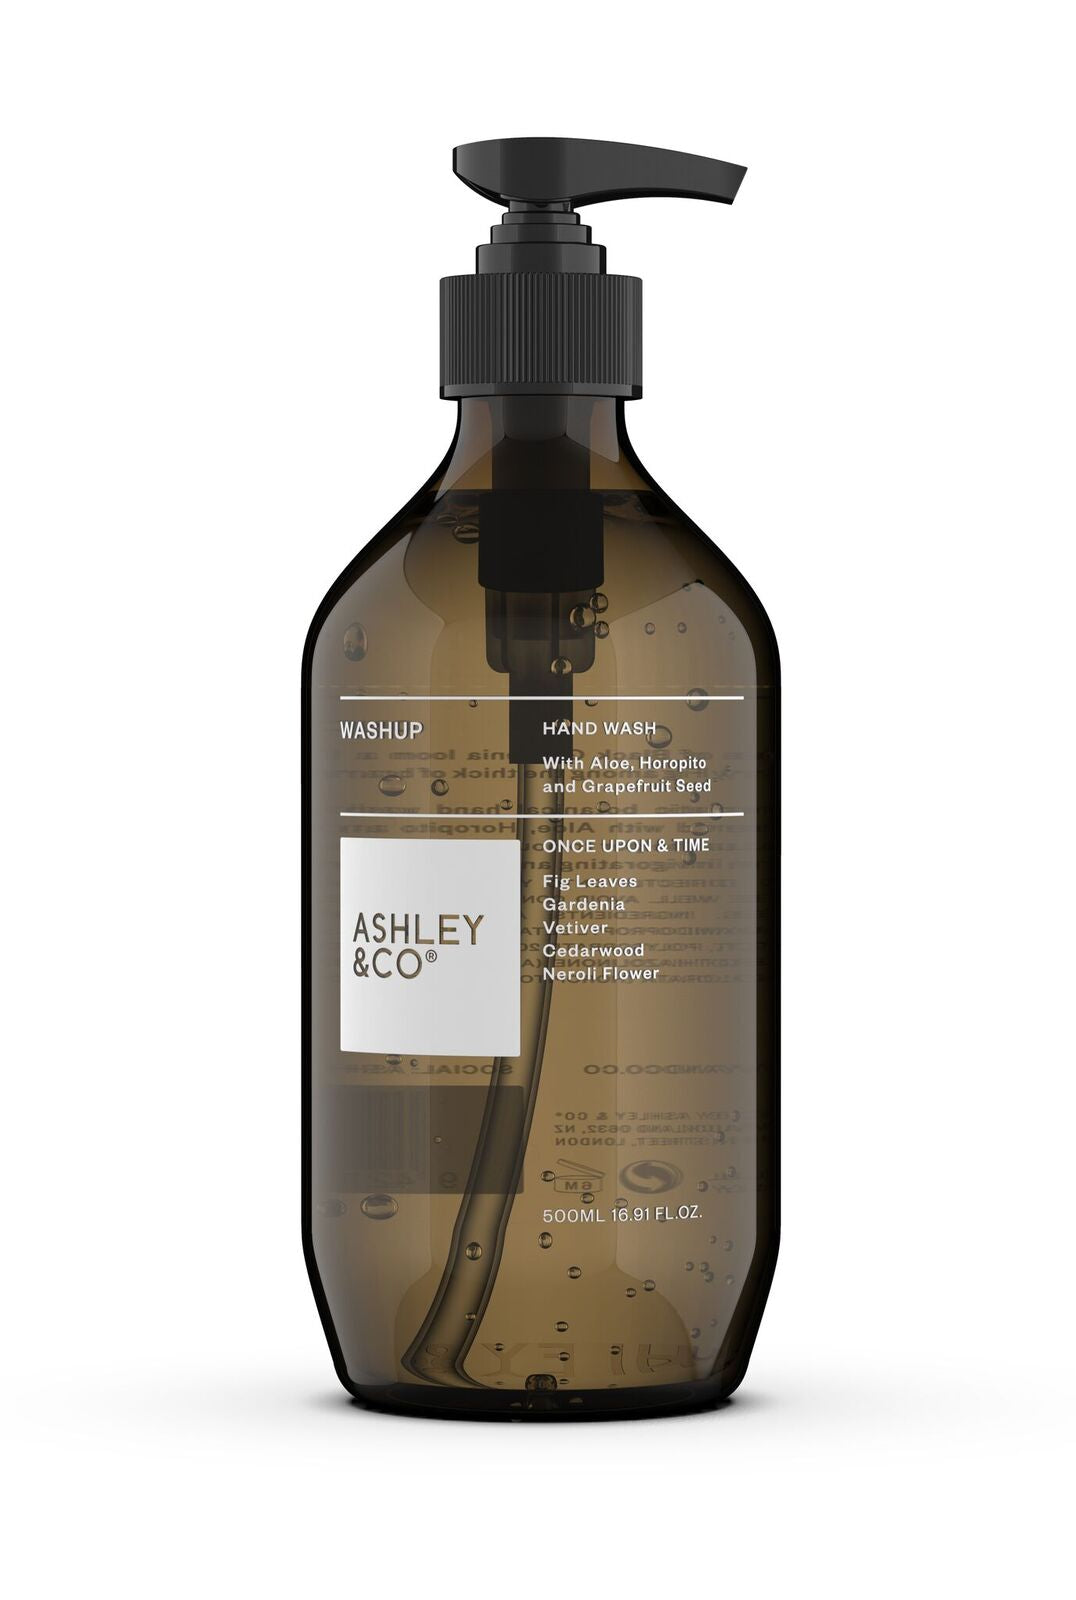 Ashley & Co Wash Up - Hand & Body Wash 500ml, Once Upon A Time